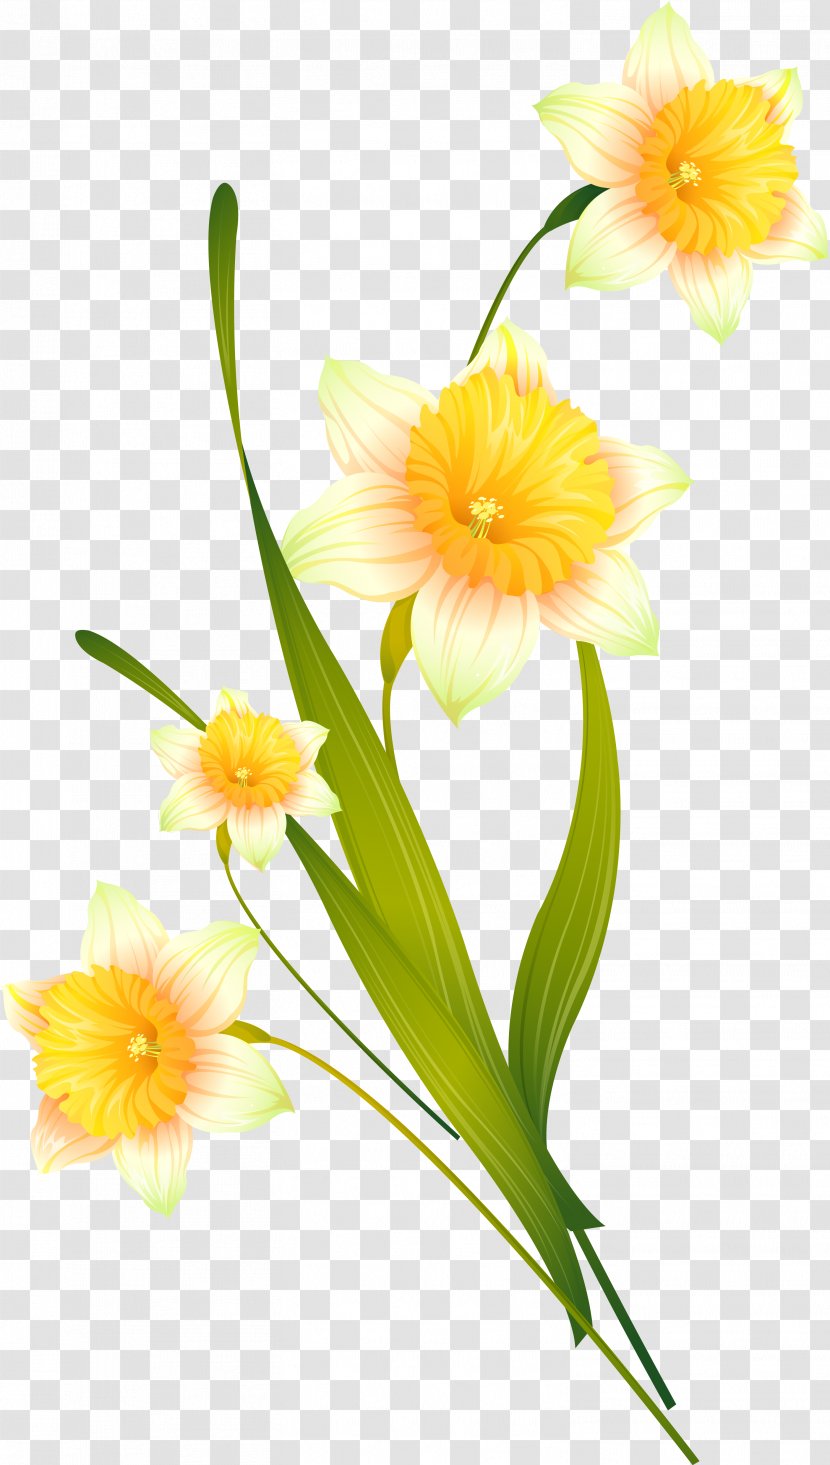 Floral Design Photography Daffodil - Flowering Plant - Creative Daffodils Transparent PNG